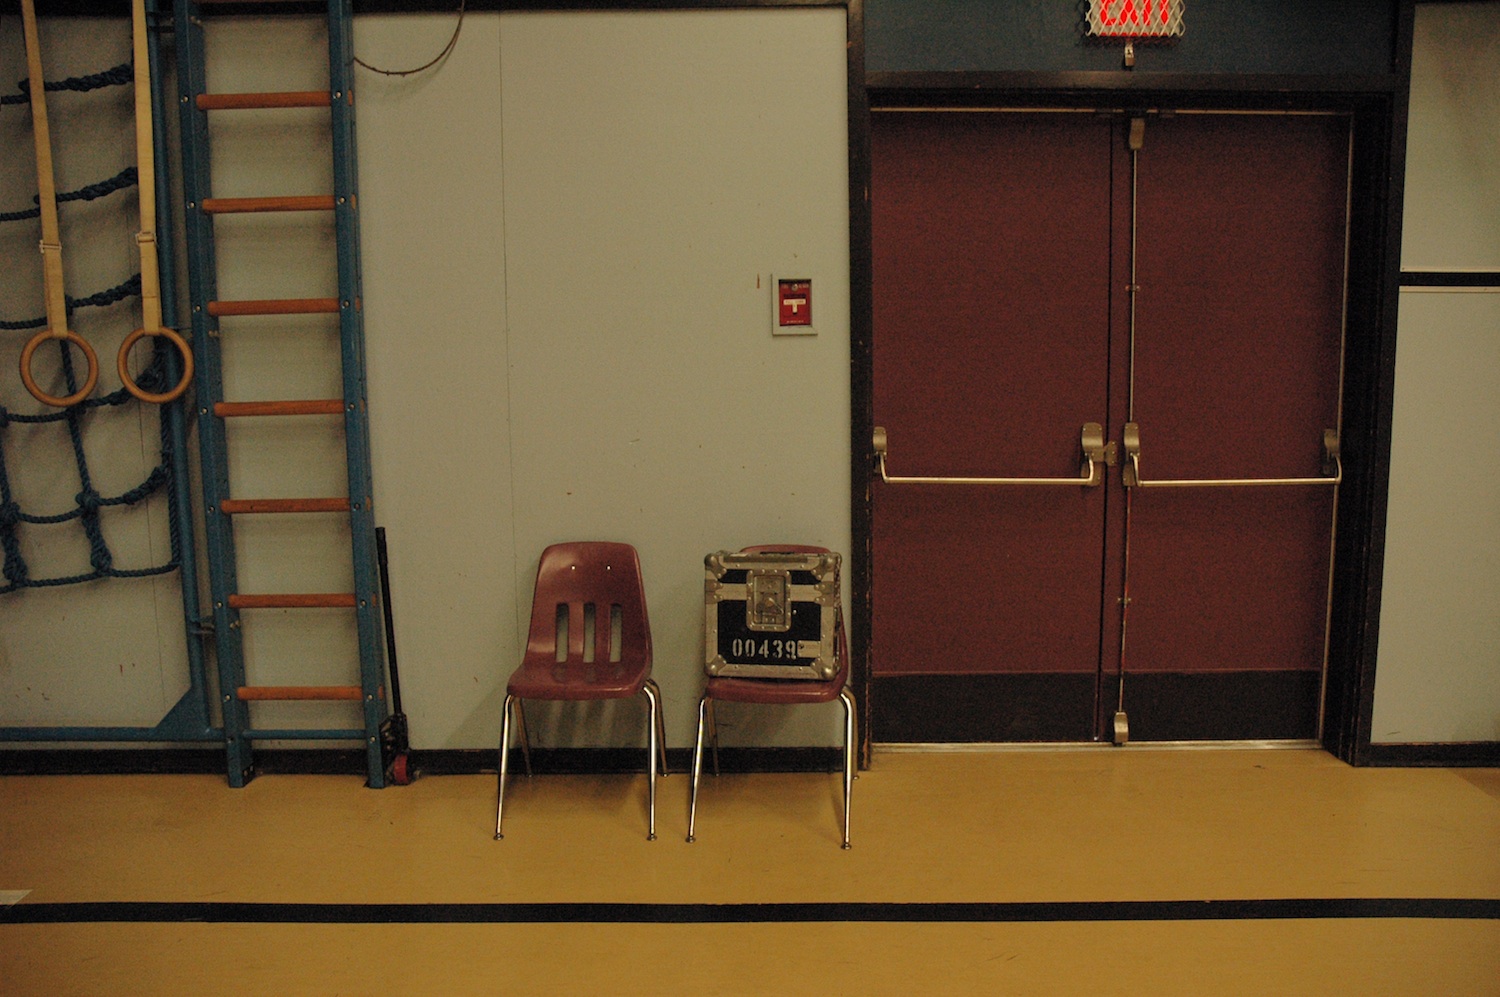 Chairs in Gym
